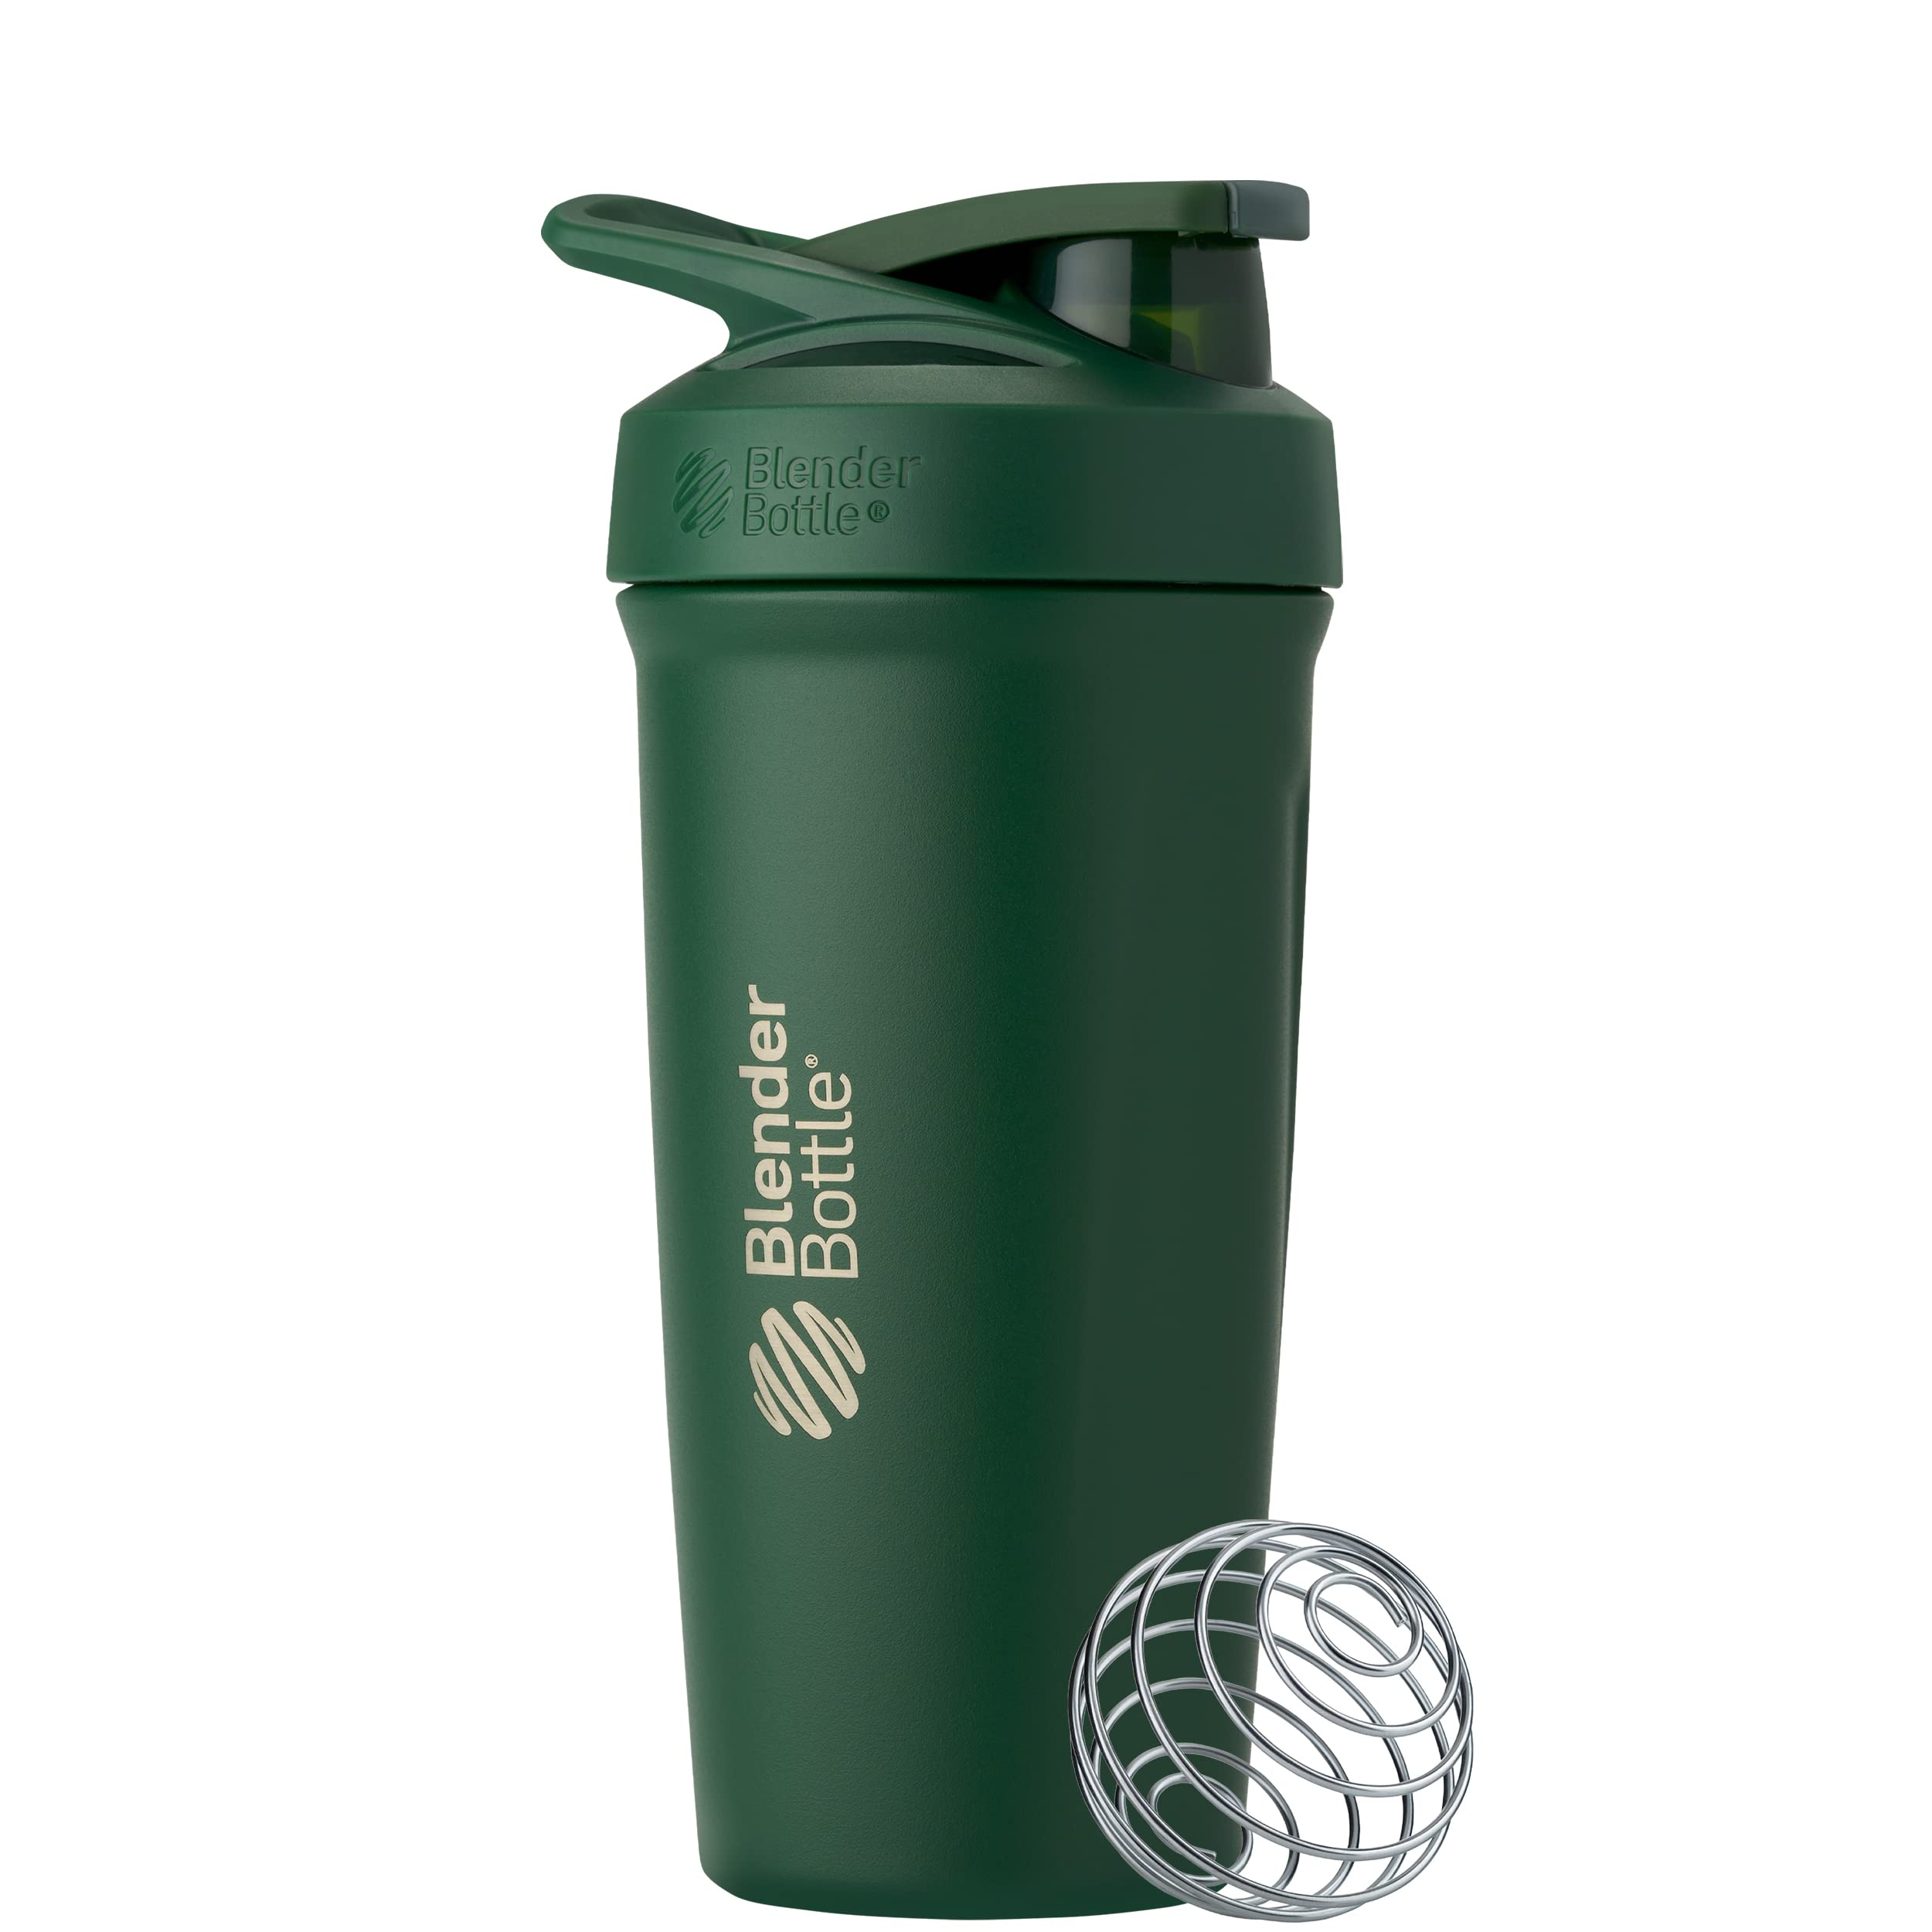 BlenderBottle Strada Shaker Cup Insulated Stainless Steel Water Bottle with Wire Whisk, 24-Ounce, Forest